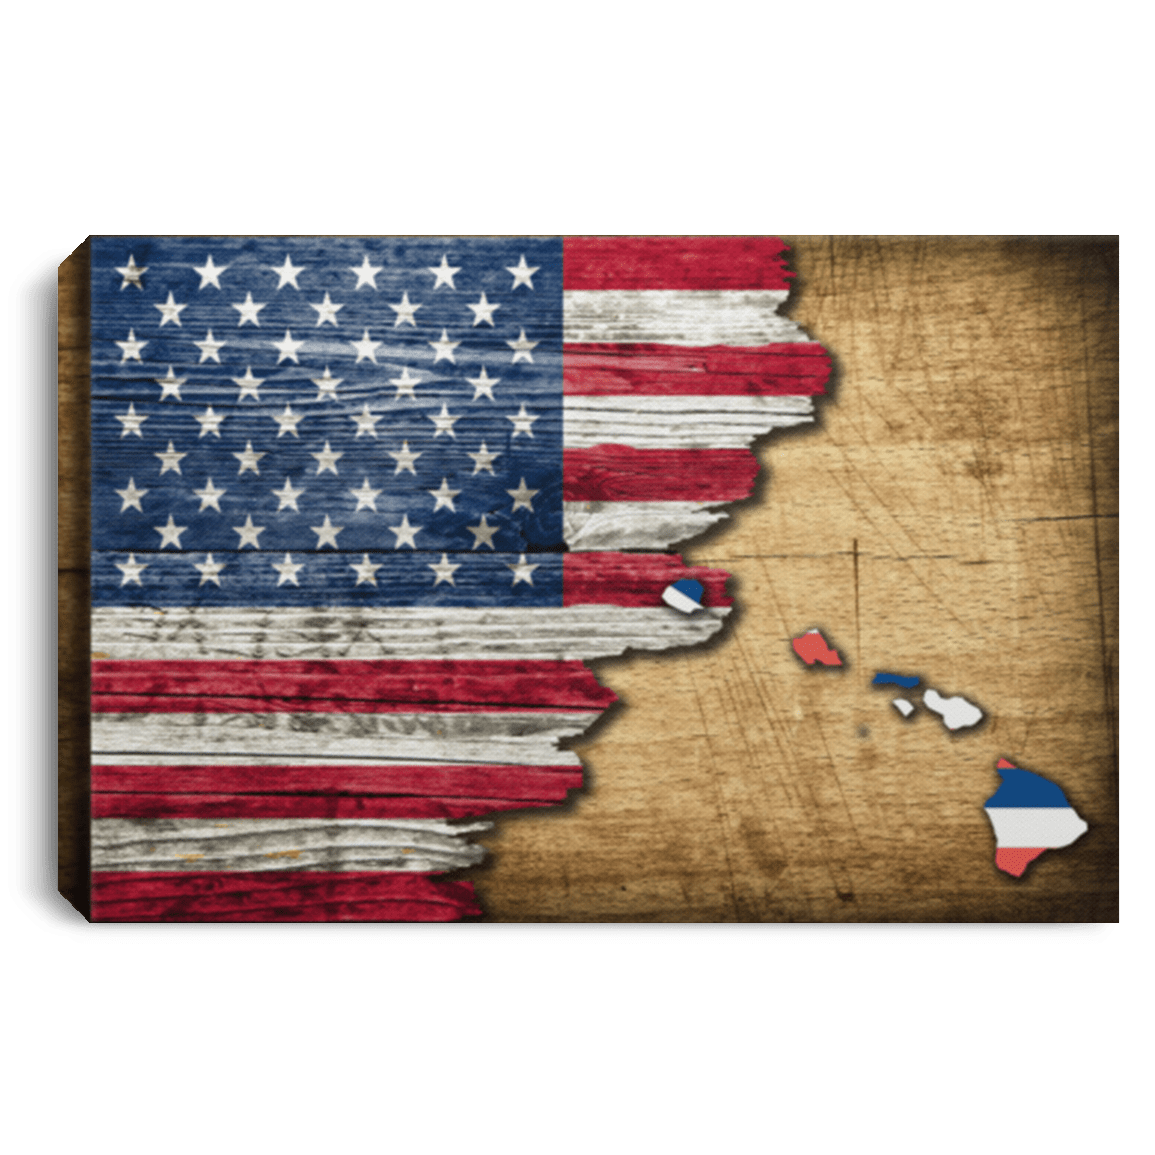 United States/Hawaii Flag Ripped Effect 12X8 Inches Landscape Canvas .75In Frame